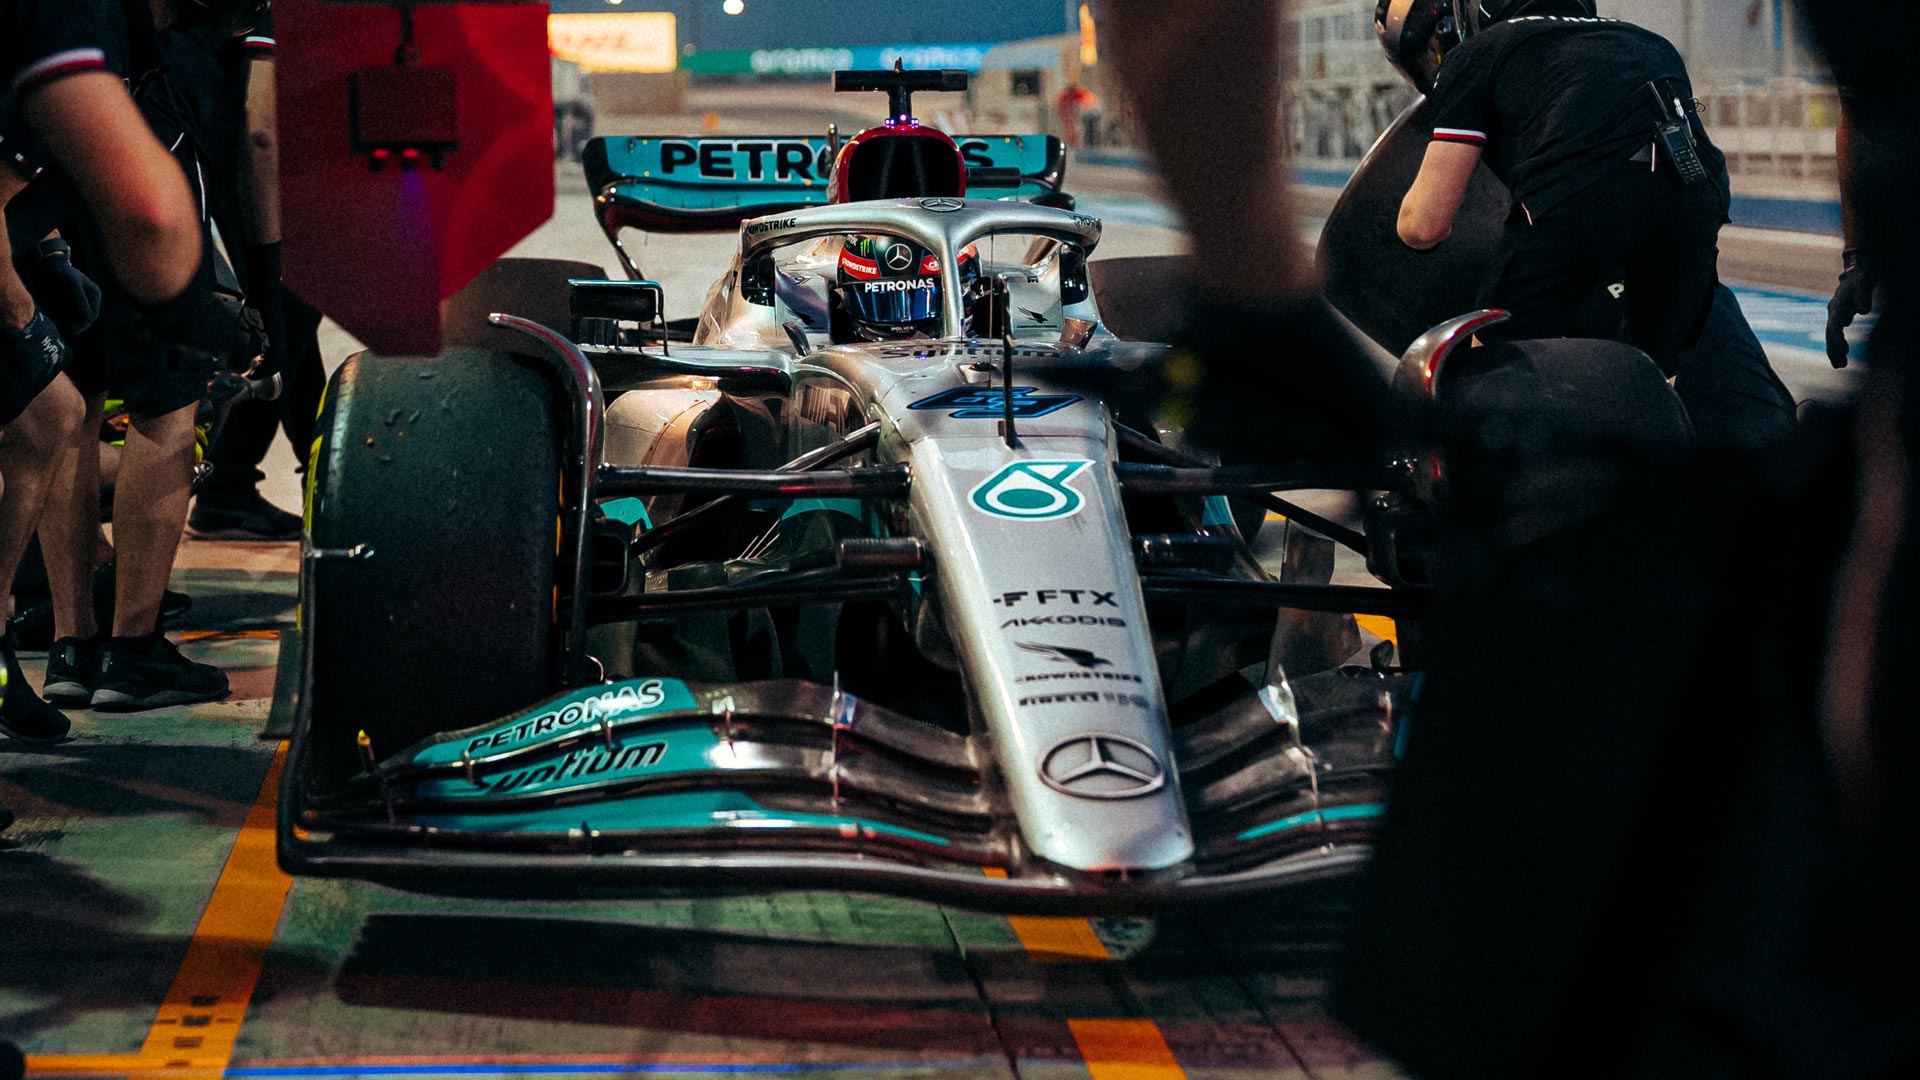 At the moment the performance isn't there' says George Russell as Mercedes end 2022 testing with work to do. Formula 1®